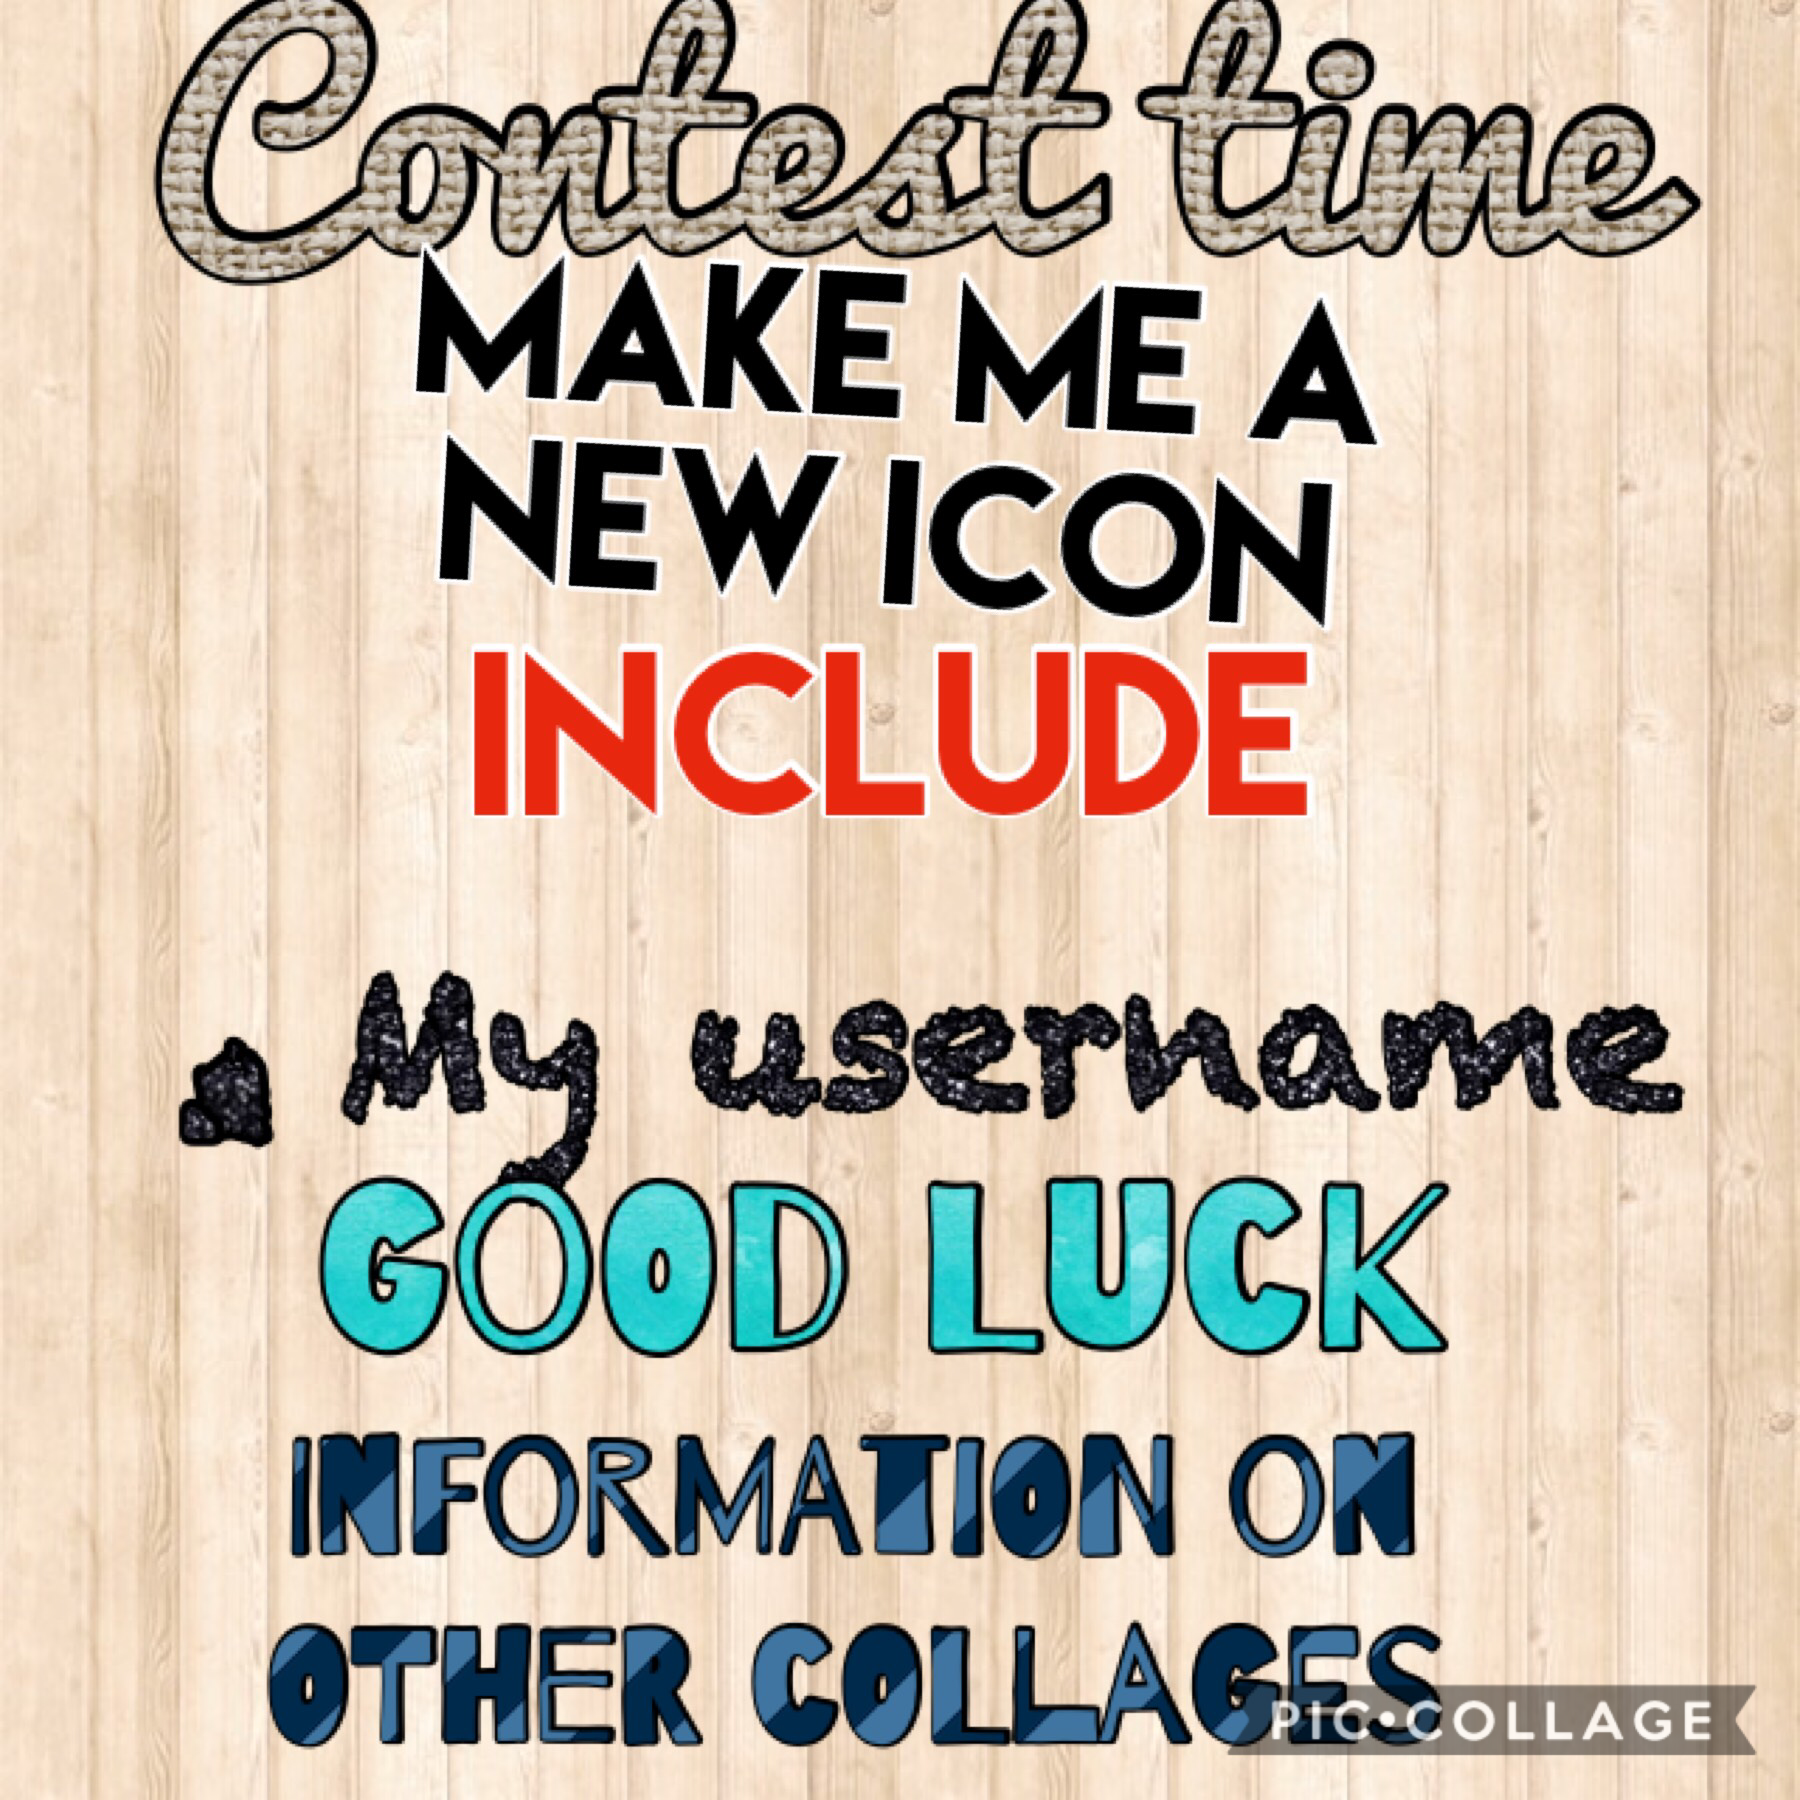 🎉Contest time🎉